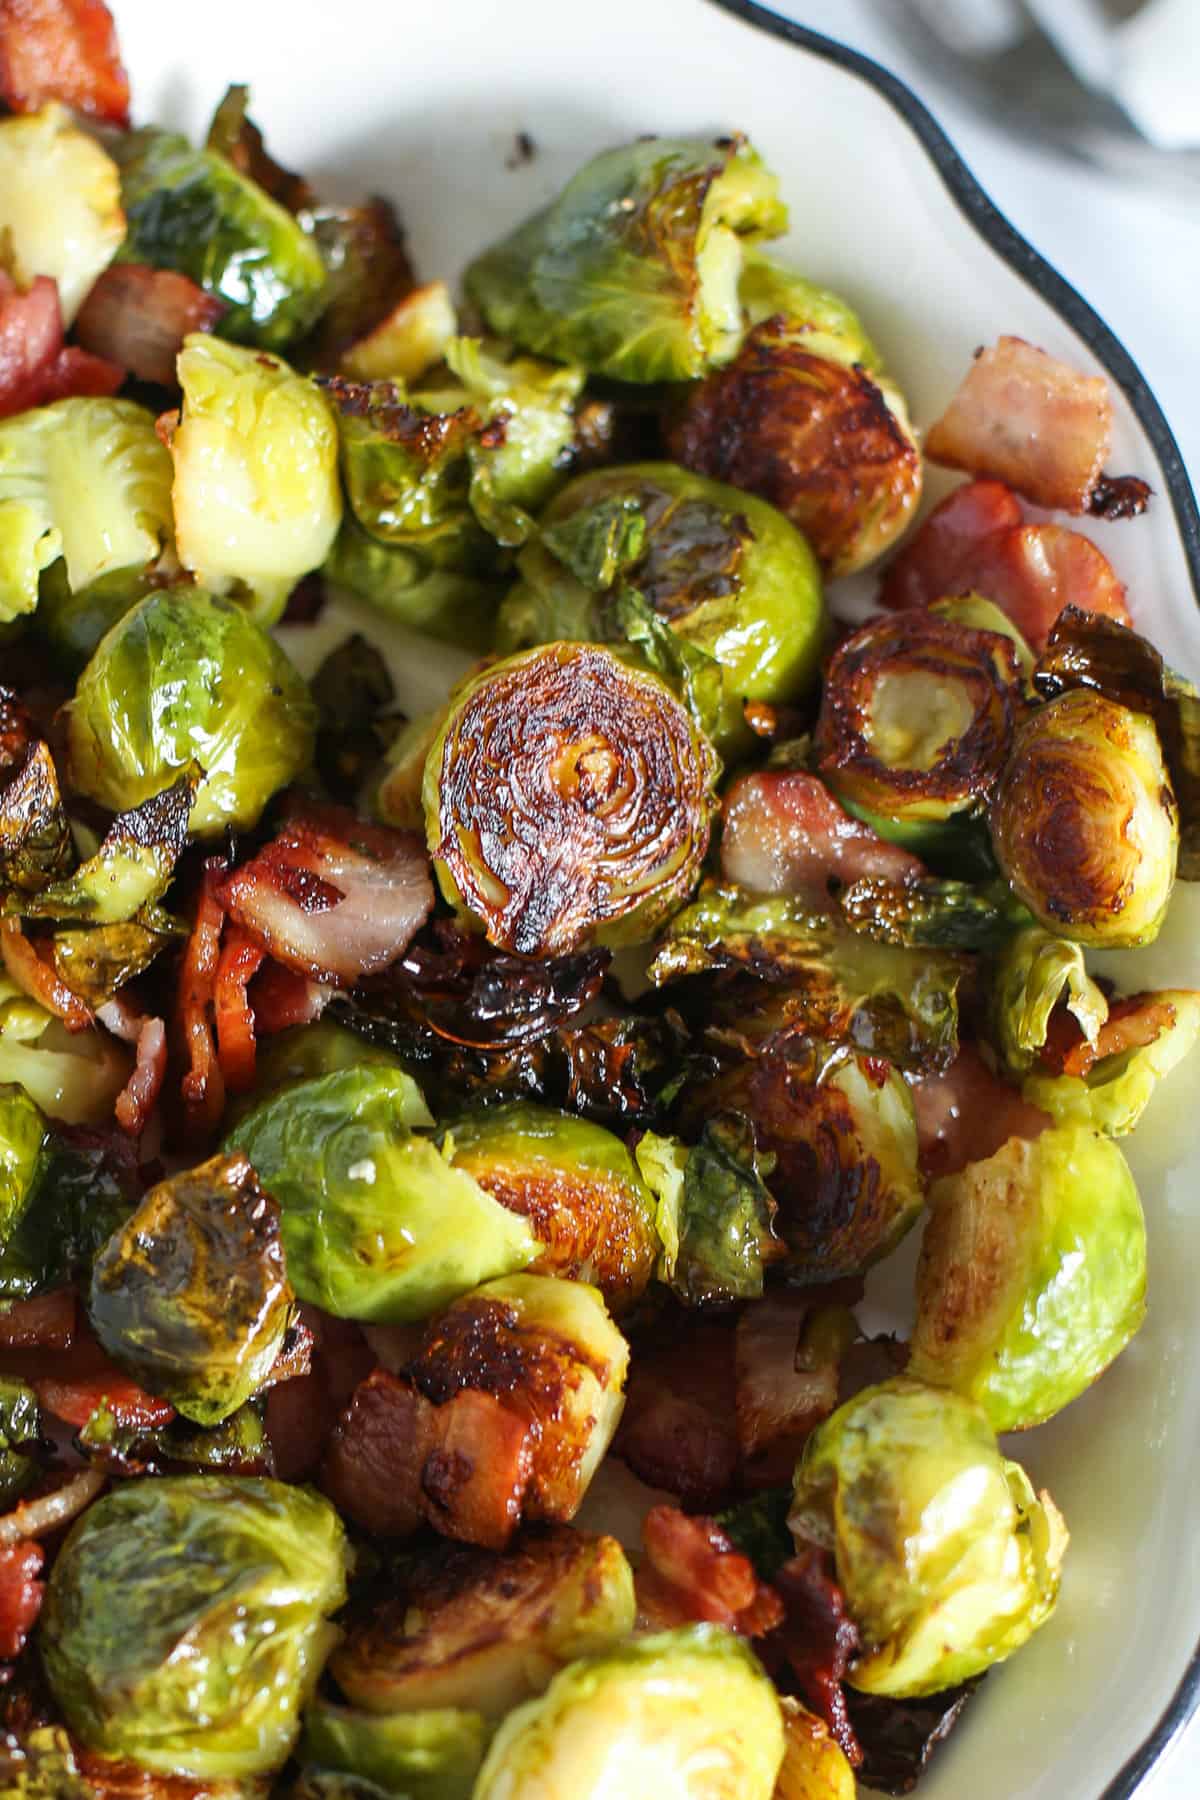 Roasted Brussels sprouts with bacon in a serving dish.